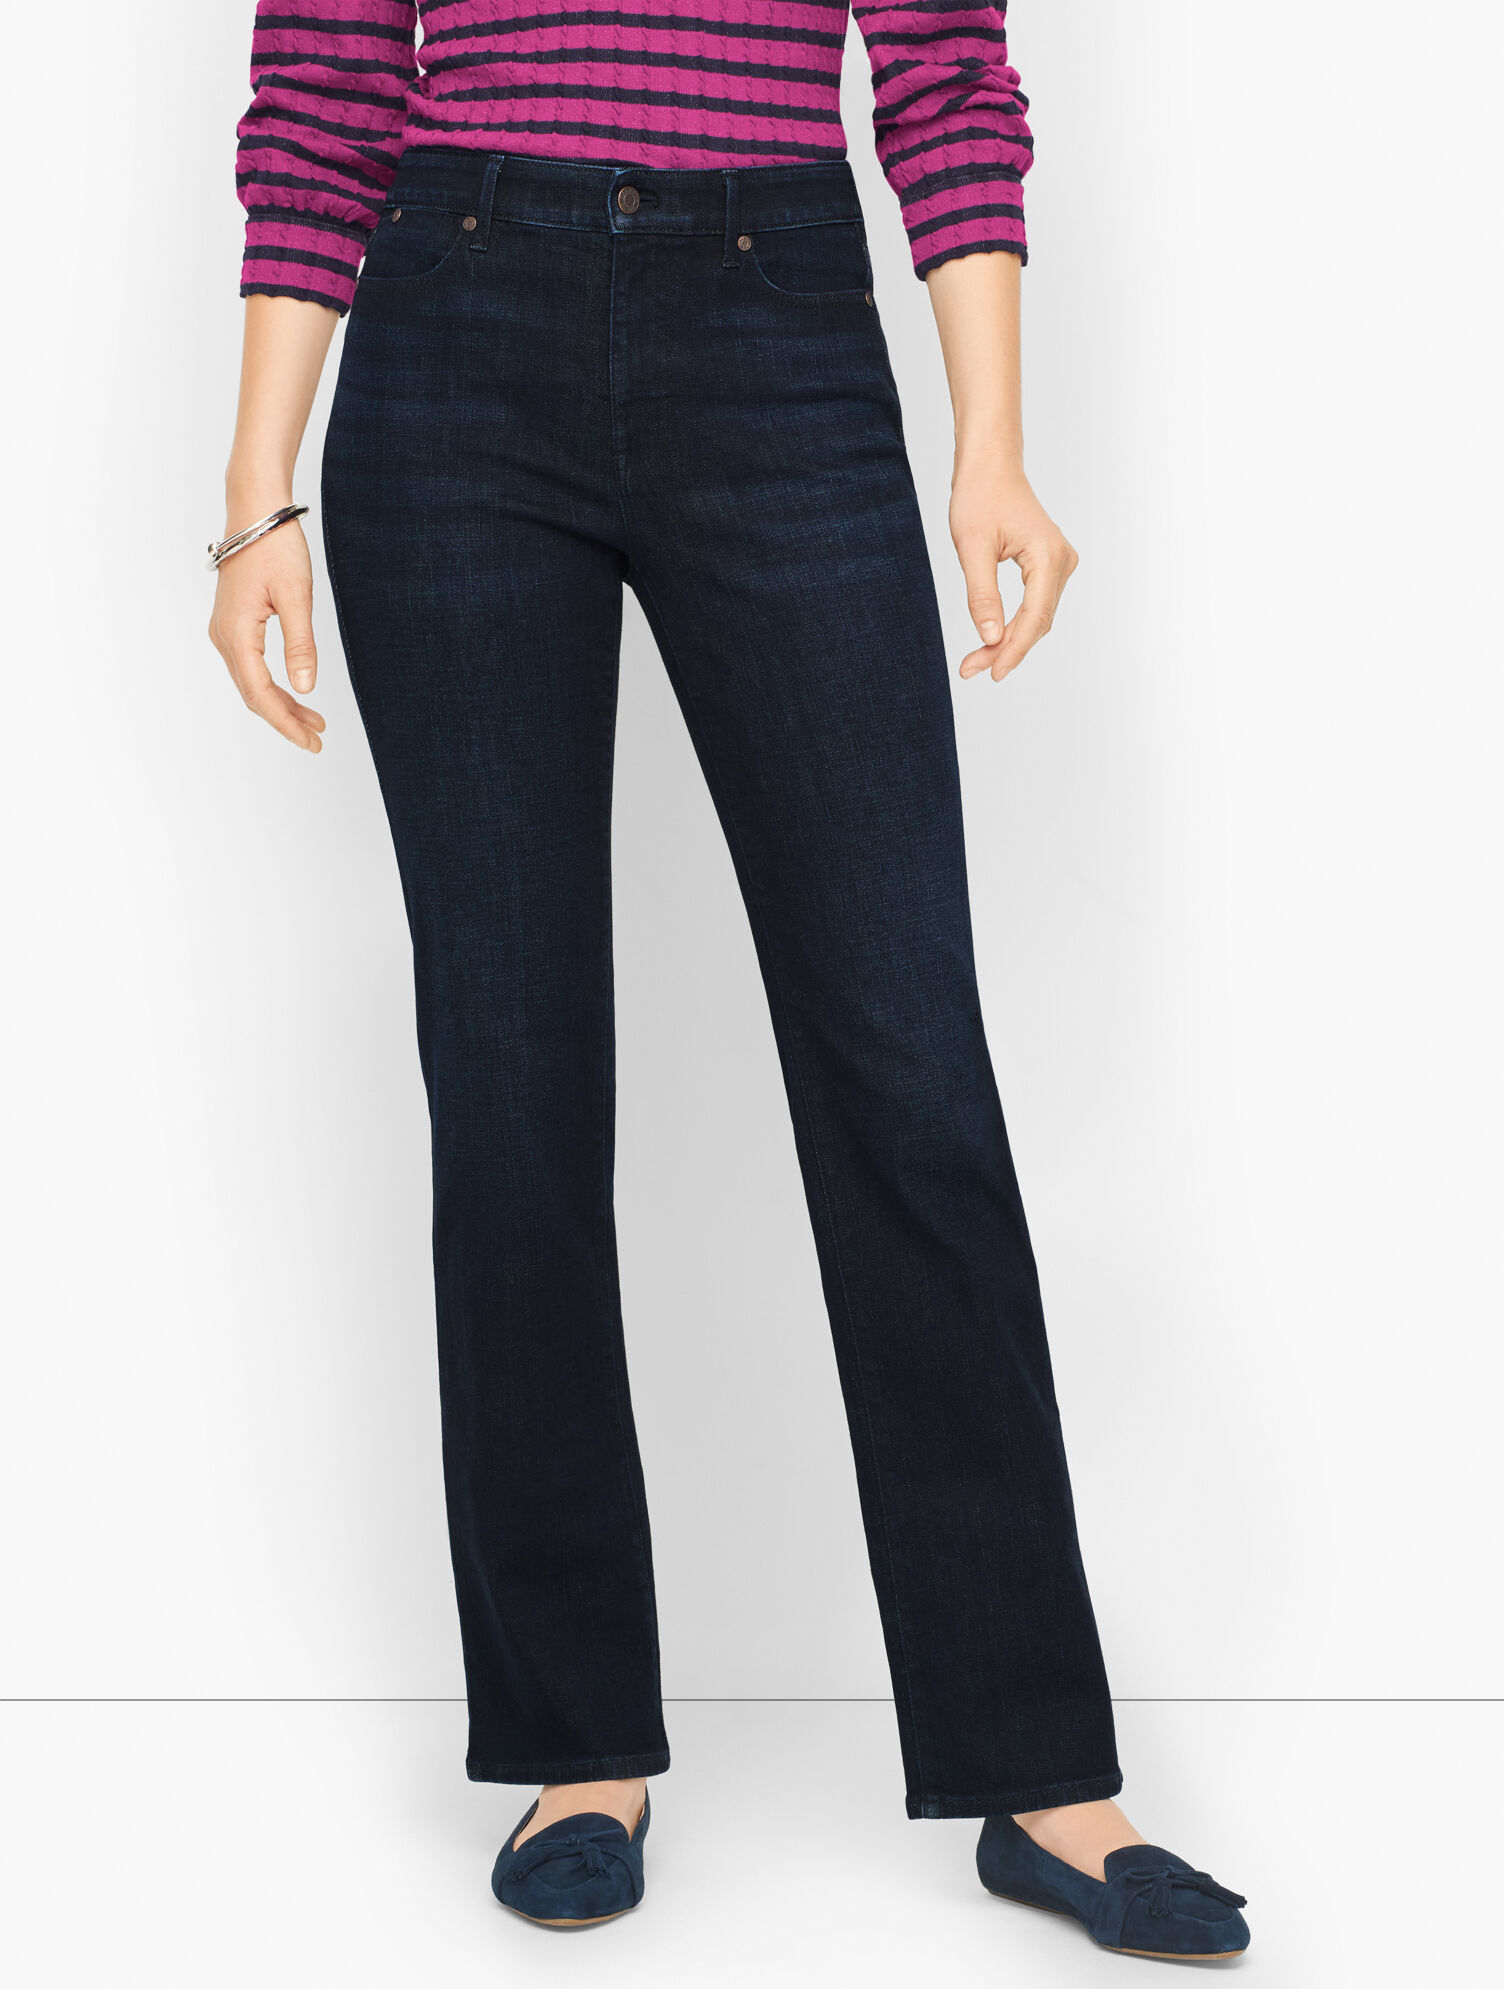 Barely Boot Jeans - Starlight Wash | Talbots